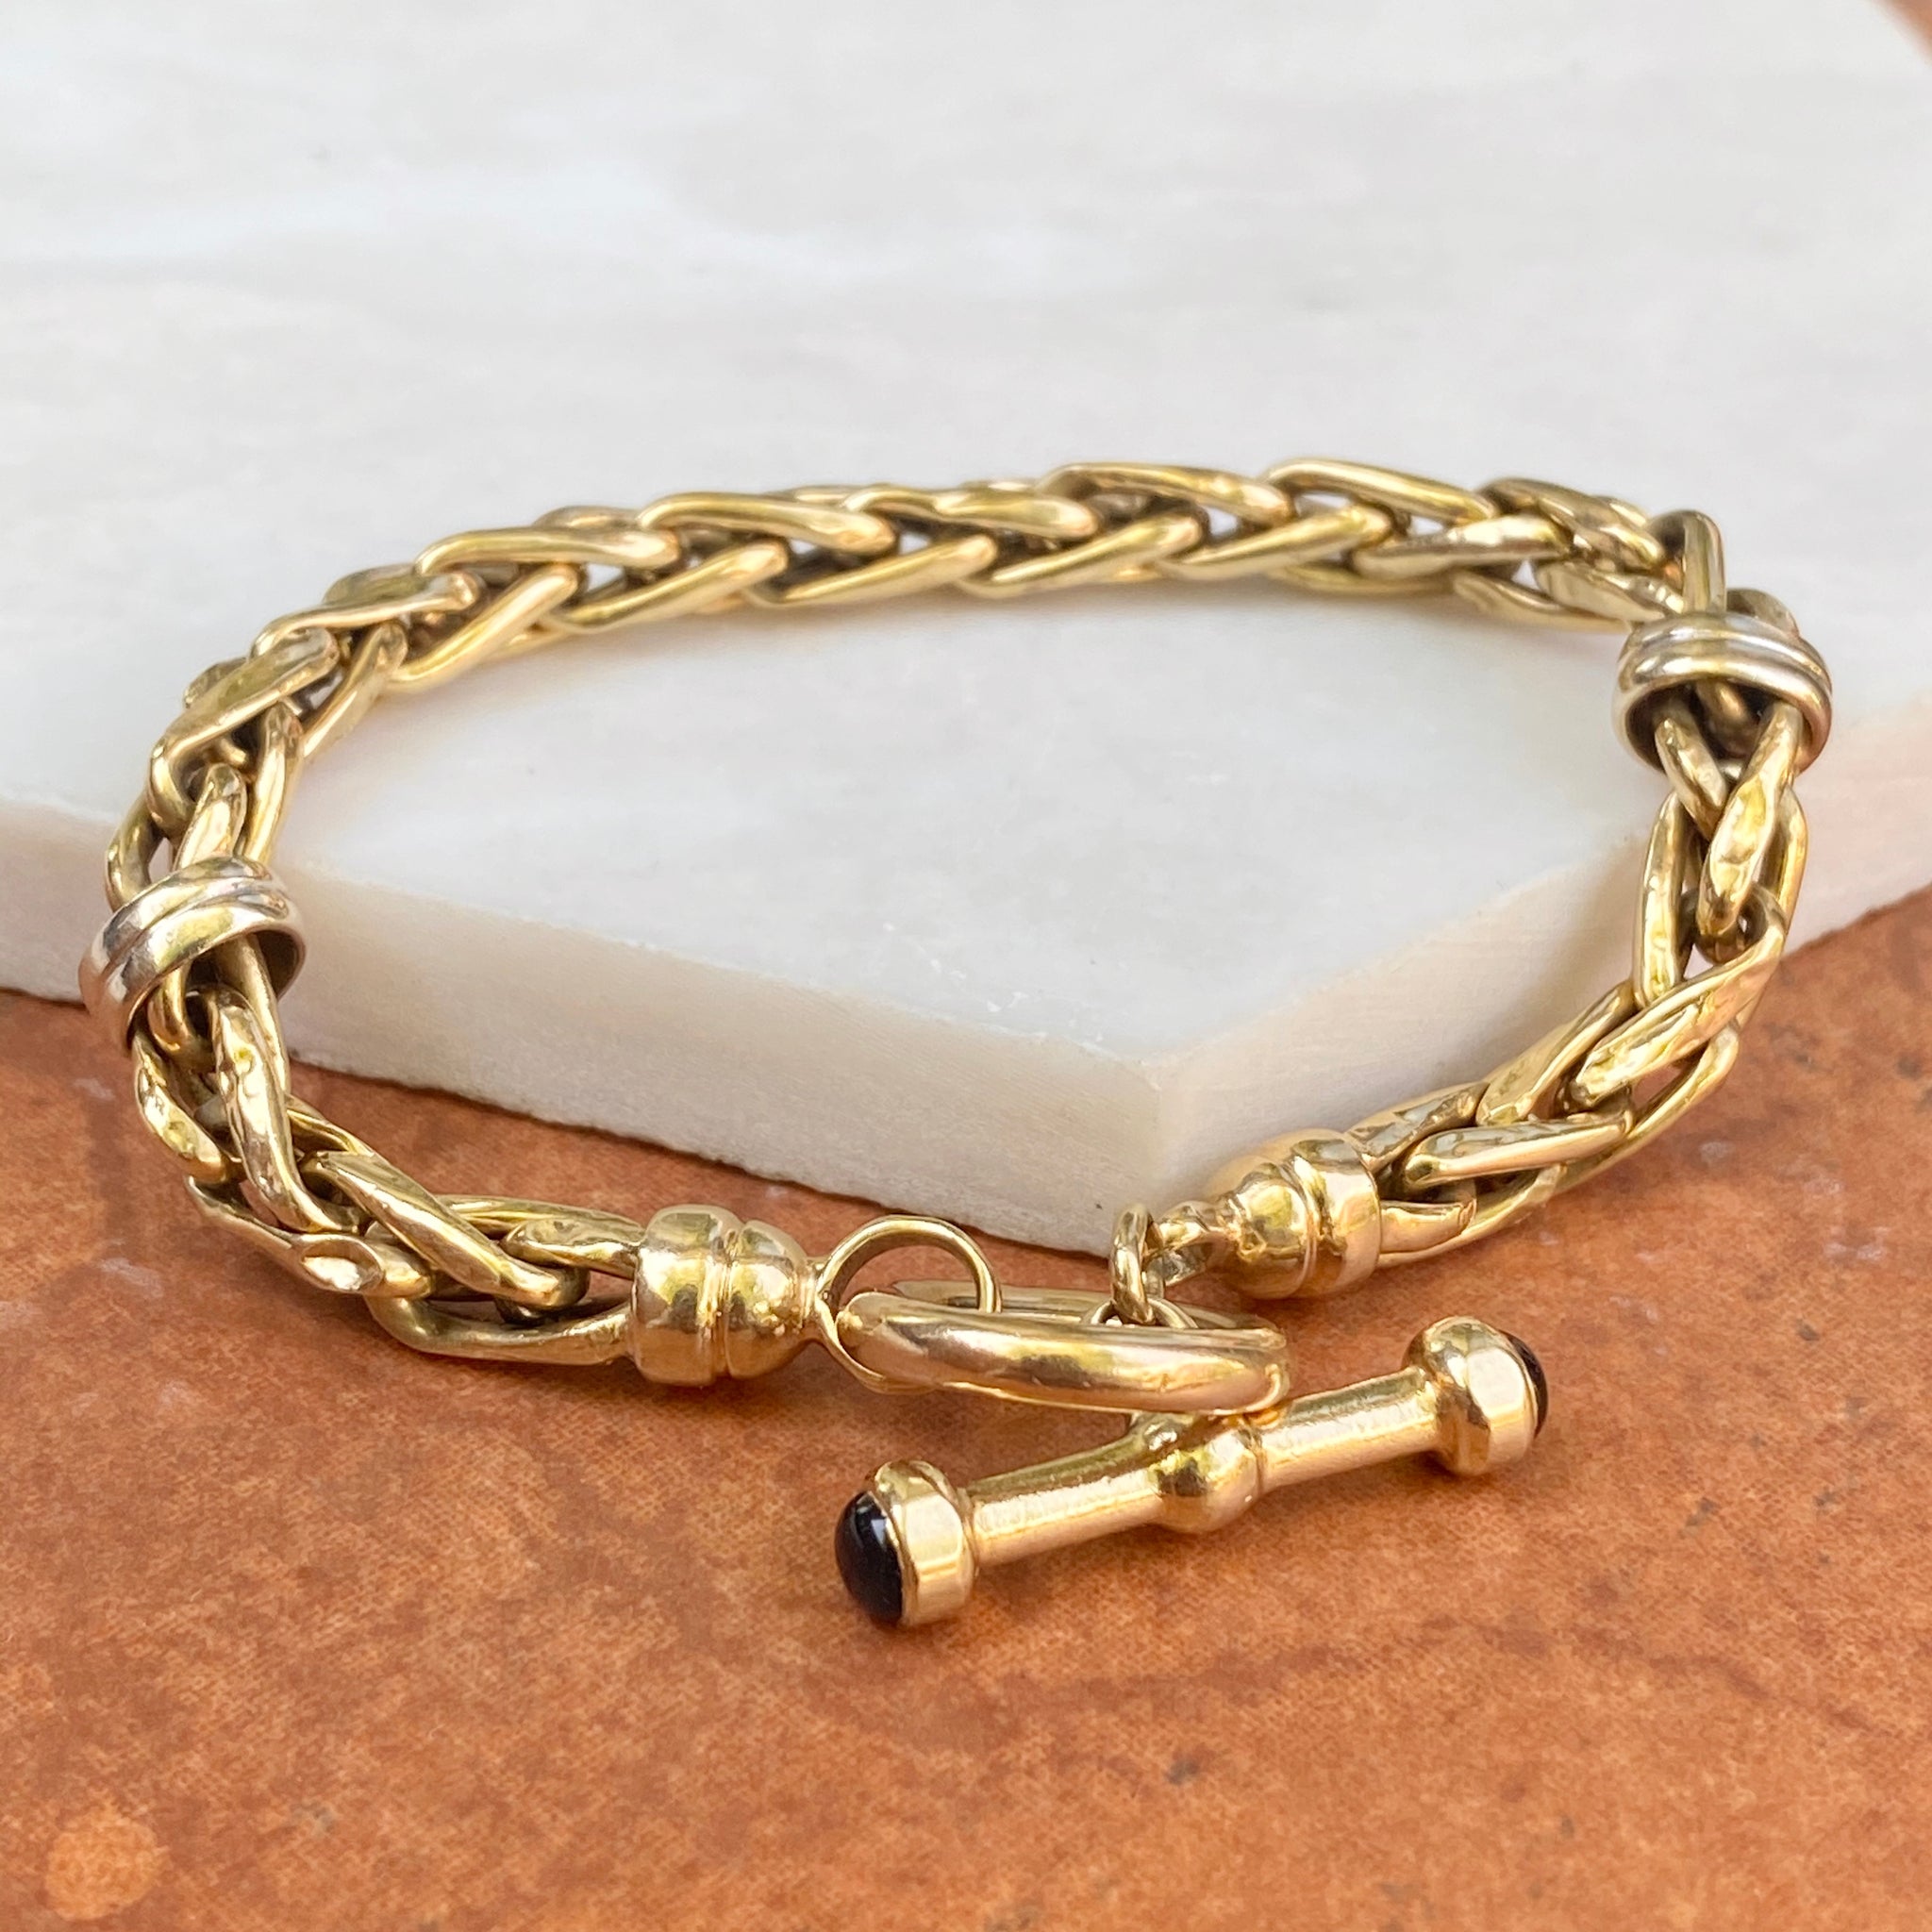 Wheat Link Chain Bracelet in 14K Gold - Yellow Gold